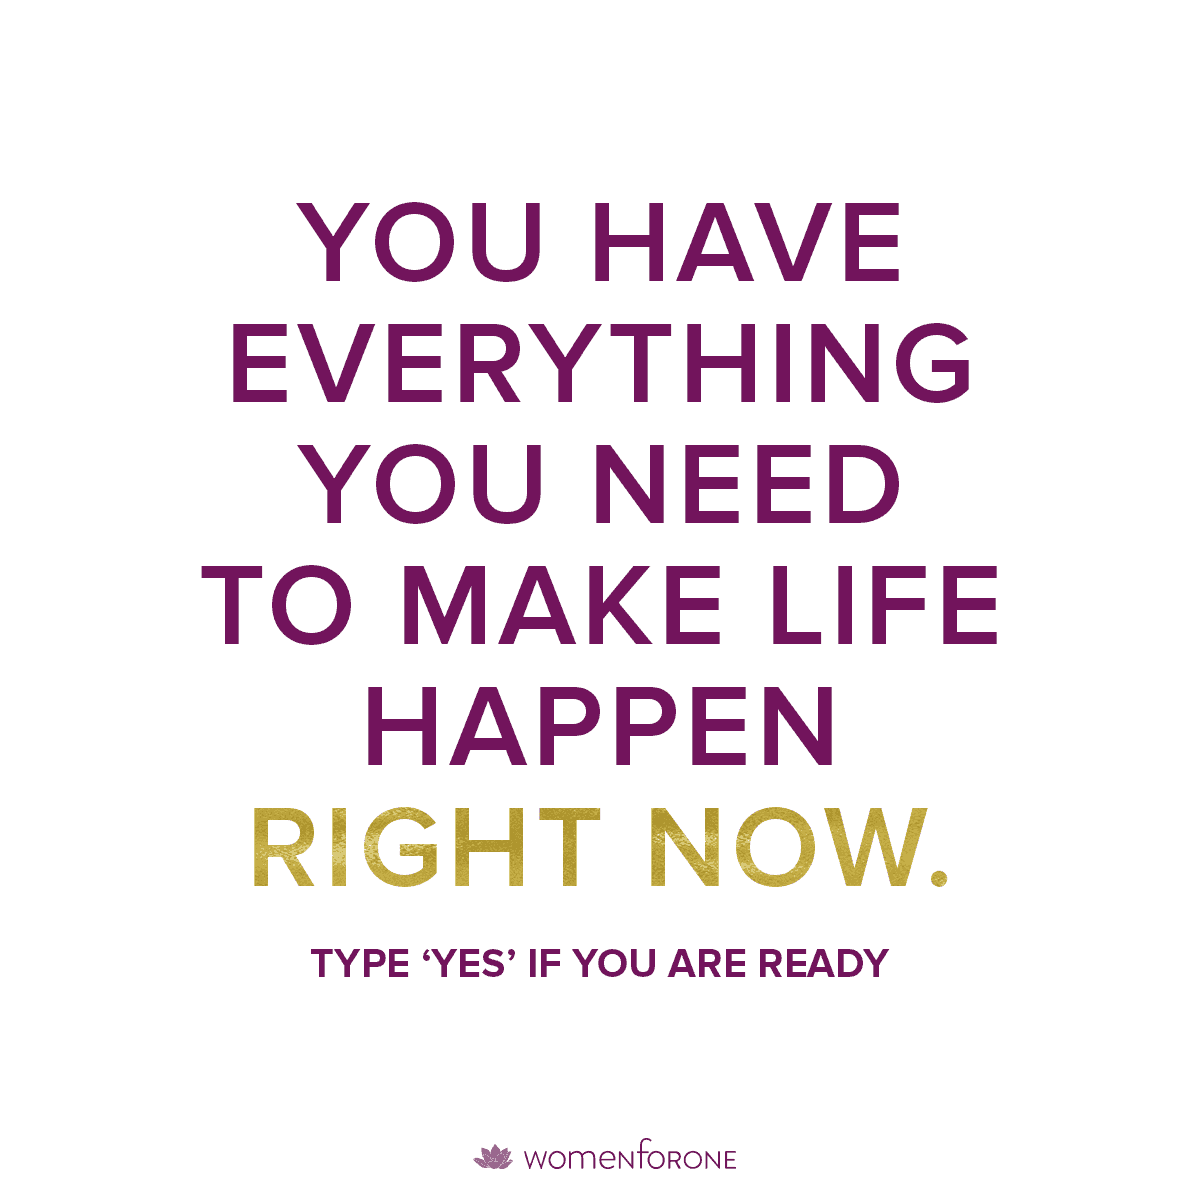 You have everything you need to make life happen right now.